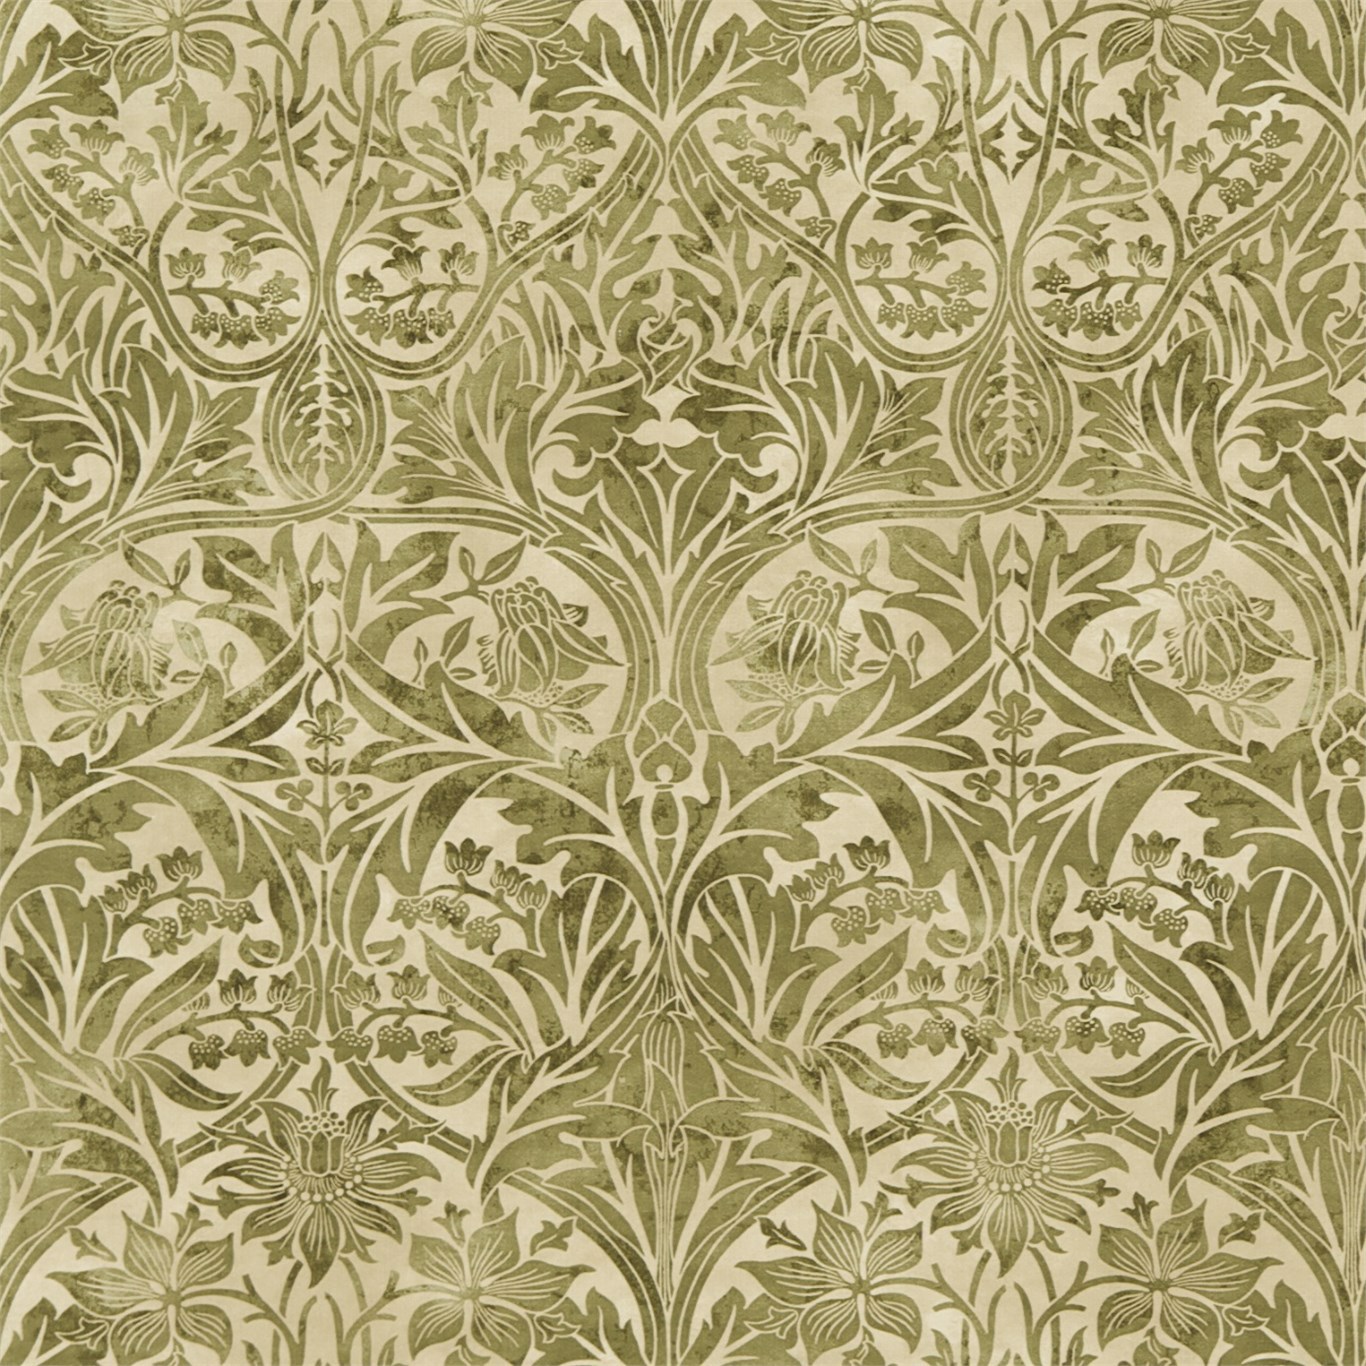 Bluebell Thyme/Vellum Fabric by MOR